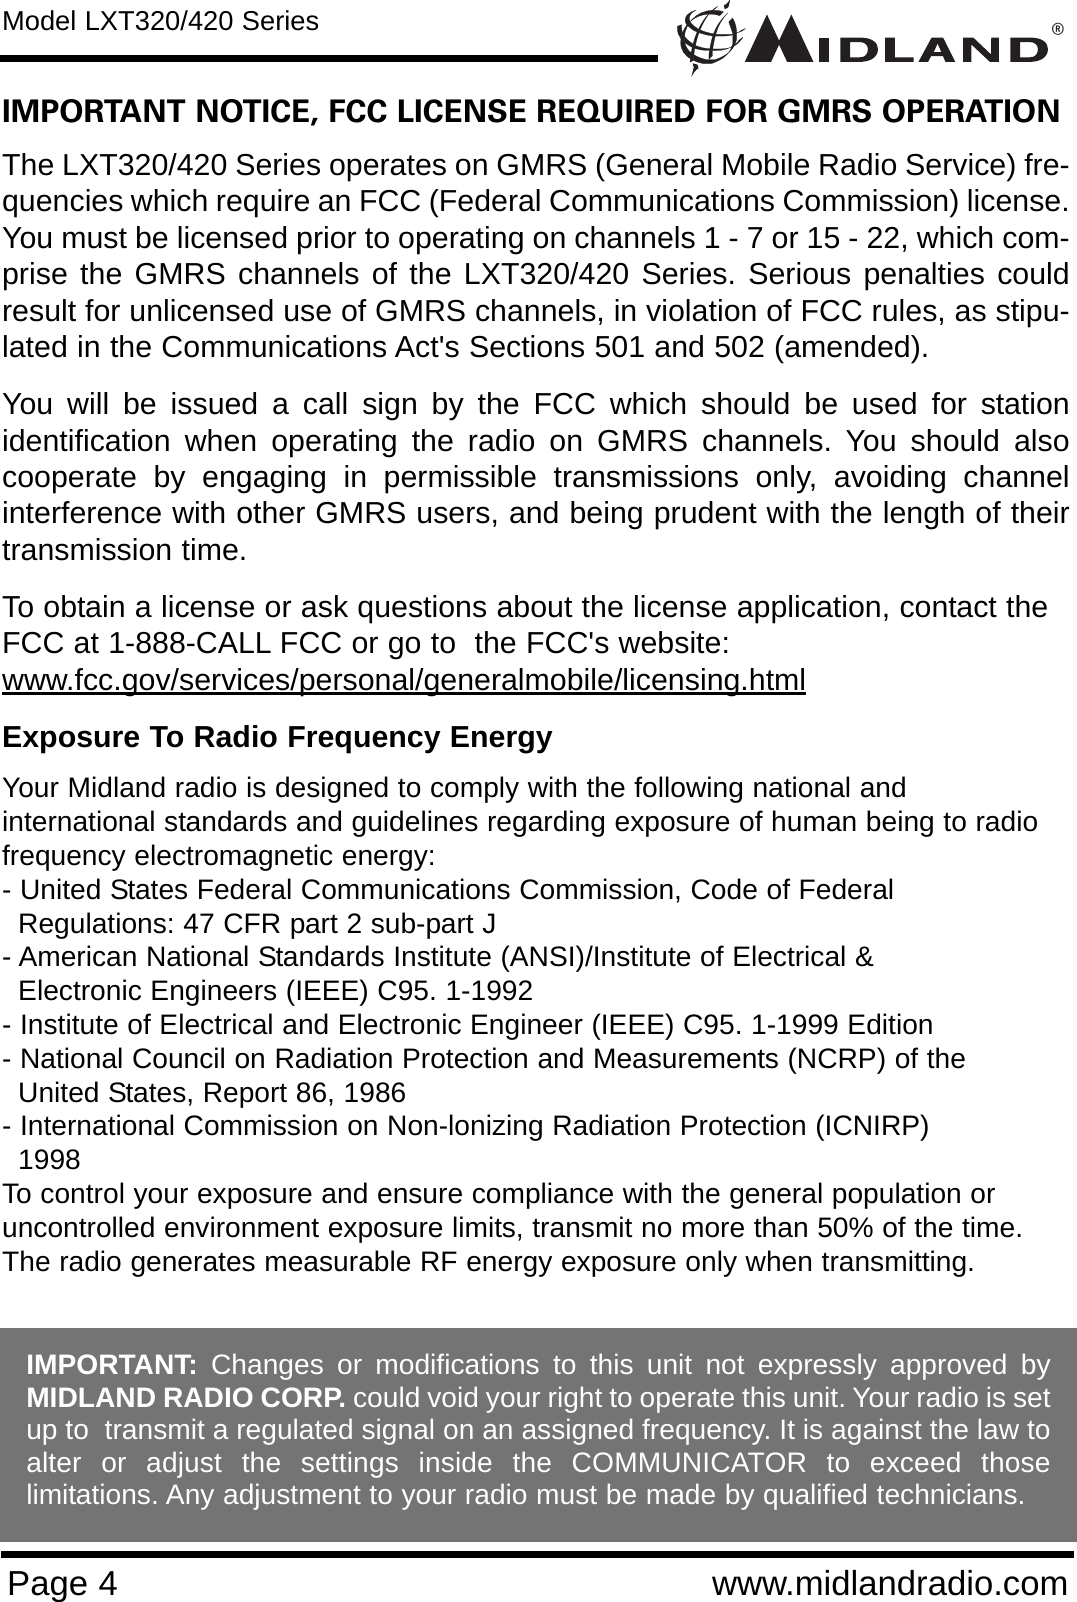 ®Page 4 www.midlandradio.comIMPORTANT NOTICE, FCC LICENSE REQUIRED FOR GMRS OPERATIONThe LXT320/420 Series operates on GMRS (General Mobile Radio Service) fre-quencies which require an FCC (Federal Communications Commission) license.You must be licensed prior to operating on channels 1 - 7 or 15 - 22, which com-prise the GMRS channels of the LXT320/420 Series. Serious penalties couldresult for unlicensed use of GMRS channels, in violation of FCC rules, as stipu-lated in the Communications Act&apos;s Sections 501 and 502 (amended).You will be issued a call sign by the FCC which should be used for stationidentification when operating the radio on GMRS channels. You should alsocooperate by engaging in permissible transmissions only, avoiding channelinterference with other GMRS users, and being prudent with the length of theirtransmission time.To obtain a license or ask questions about the license application, contact theFCC at 1-888-CALL FCC or go to  the FCC&apos;s website:www.fcc.gov/services/personal/generalmobile/licensing.htmlExposure To Radio Frequency EnergyYour Midland radio is designed to comply with the following national and international standards and guidelines regarding exposure of human being to radiofrequency electromagnetic energy:- United States Federal Communications Commission, Code of Federal Regulations: 47 CFR part 2 sub-part J- American National Standards Institute (ANSI)/Institute of Electrical &amp; Electronic Engineers (IEEE) C95. 1-1992- Institute of Electrical and Electronic Engineer (IEEE) C95. 1-1999 Edition- National Council on Radiation Protection and Measurements (NCRP) of the United States, Report 86, 1986- International Commission on Non-lonizing Radiation Protection (ICNIRP) 1998To control your exposure and ensure compliance with the general population oruncontrolled environment exposure limits, transmit no more than 50% of the time.The radio generates measurable RF energy exposure only when transmitting.Model LXT320/420 SeriesIMPORTANT: Changes or modifications to this unit not expressly approved byMIDLAND RADIO CORP. could void your right to operate this unit. Your radio is setup to  transmit a regulated signal on an assigned frequency. It is against the law toalter or adjust the settings inside the COMMUNICATOR to exceed thoselimitations. Any adjustment to your radio must be made by qualified technicians.